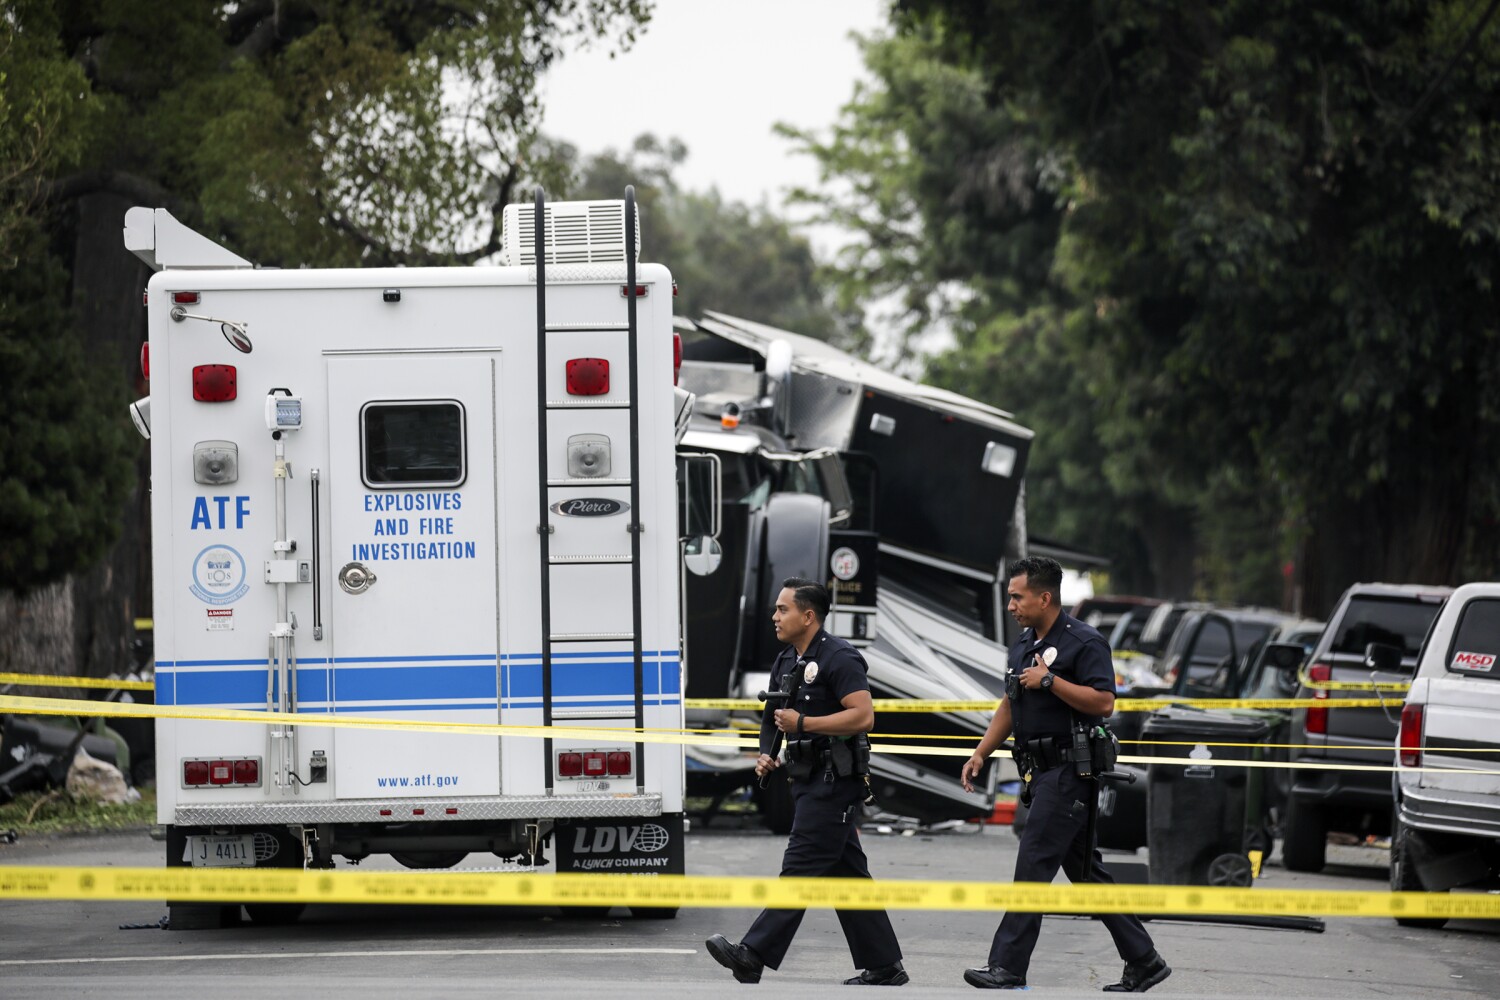 How did the LAPD manage to blow up a South L.A. block while seizing fireworks?